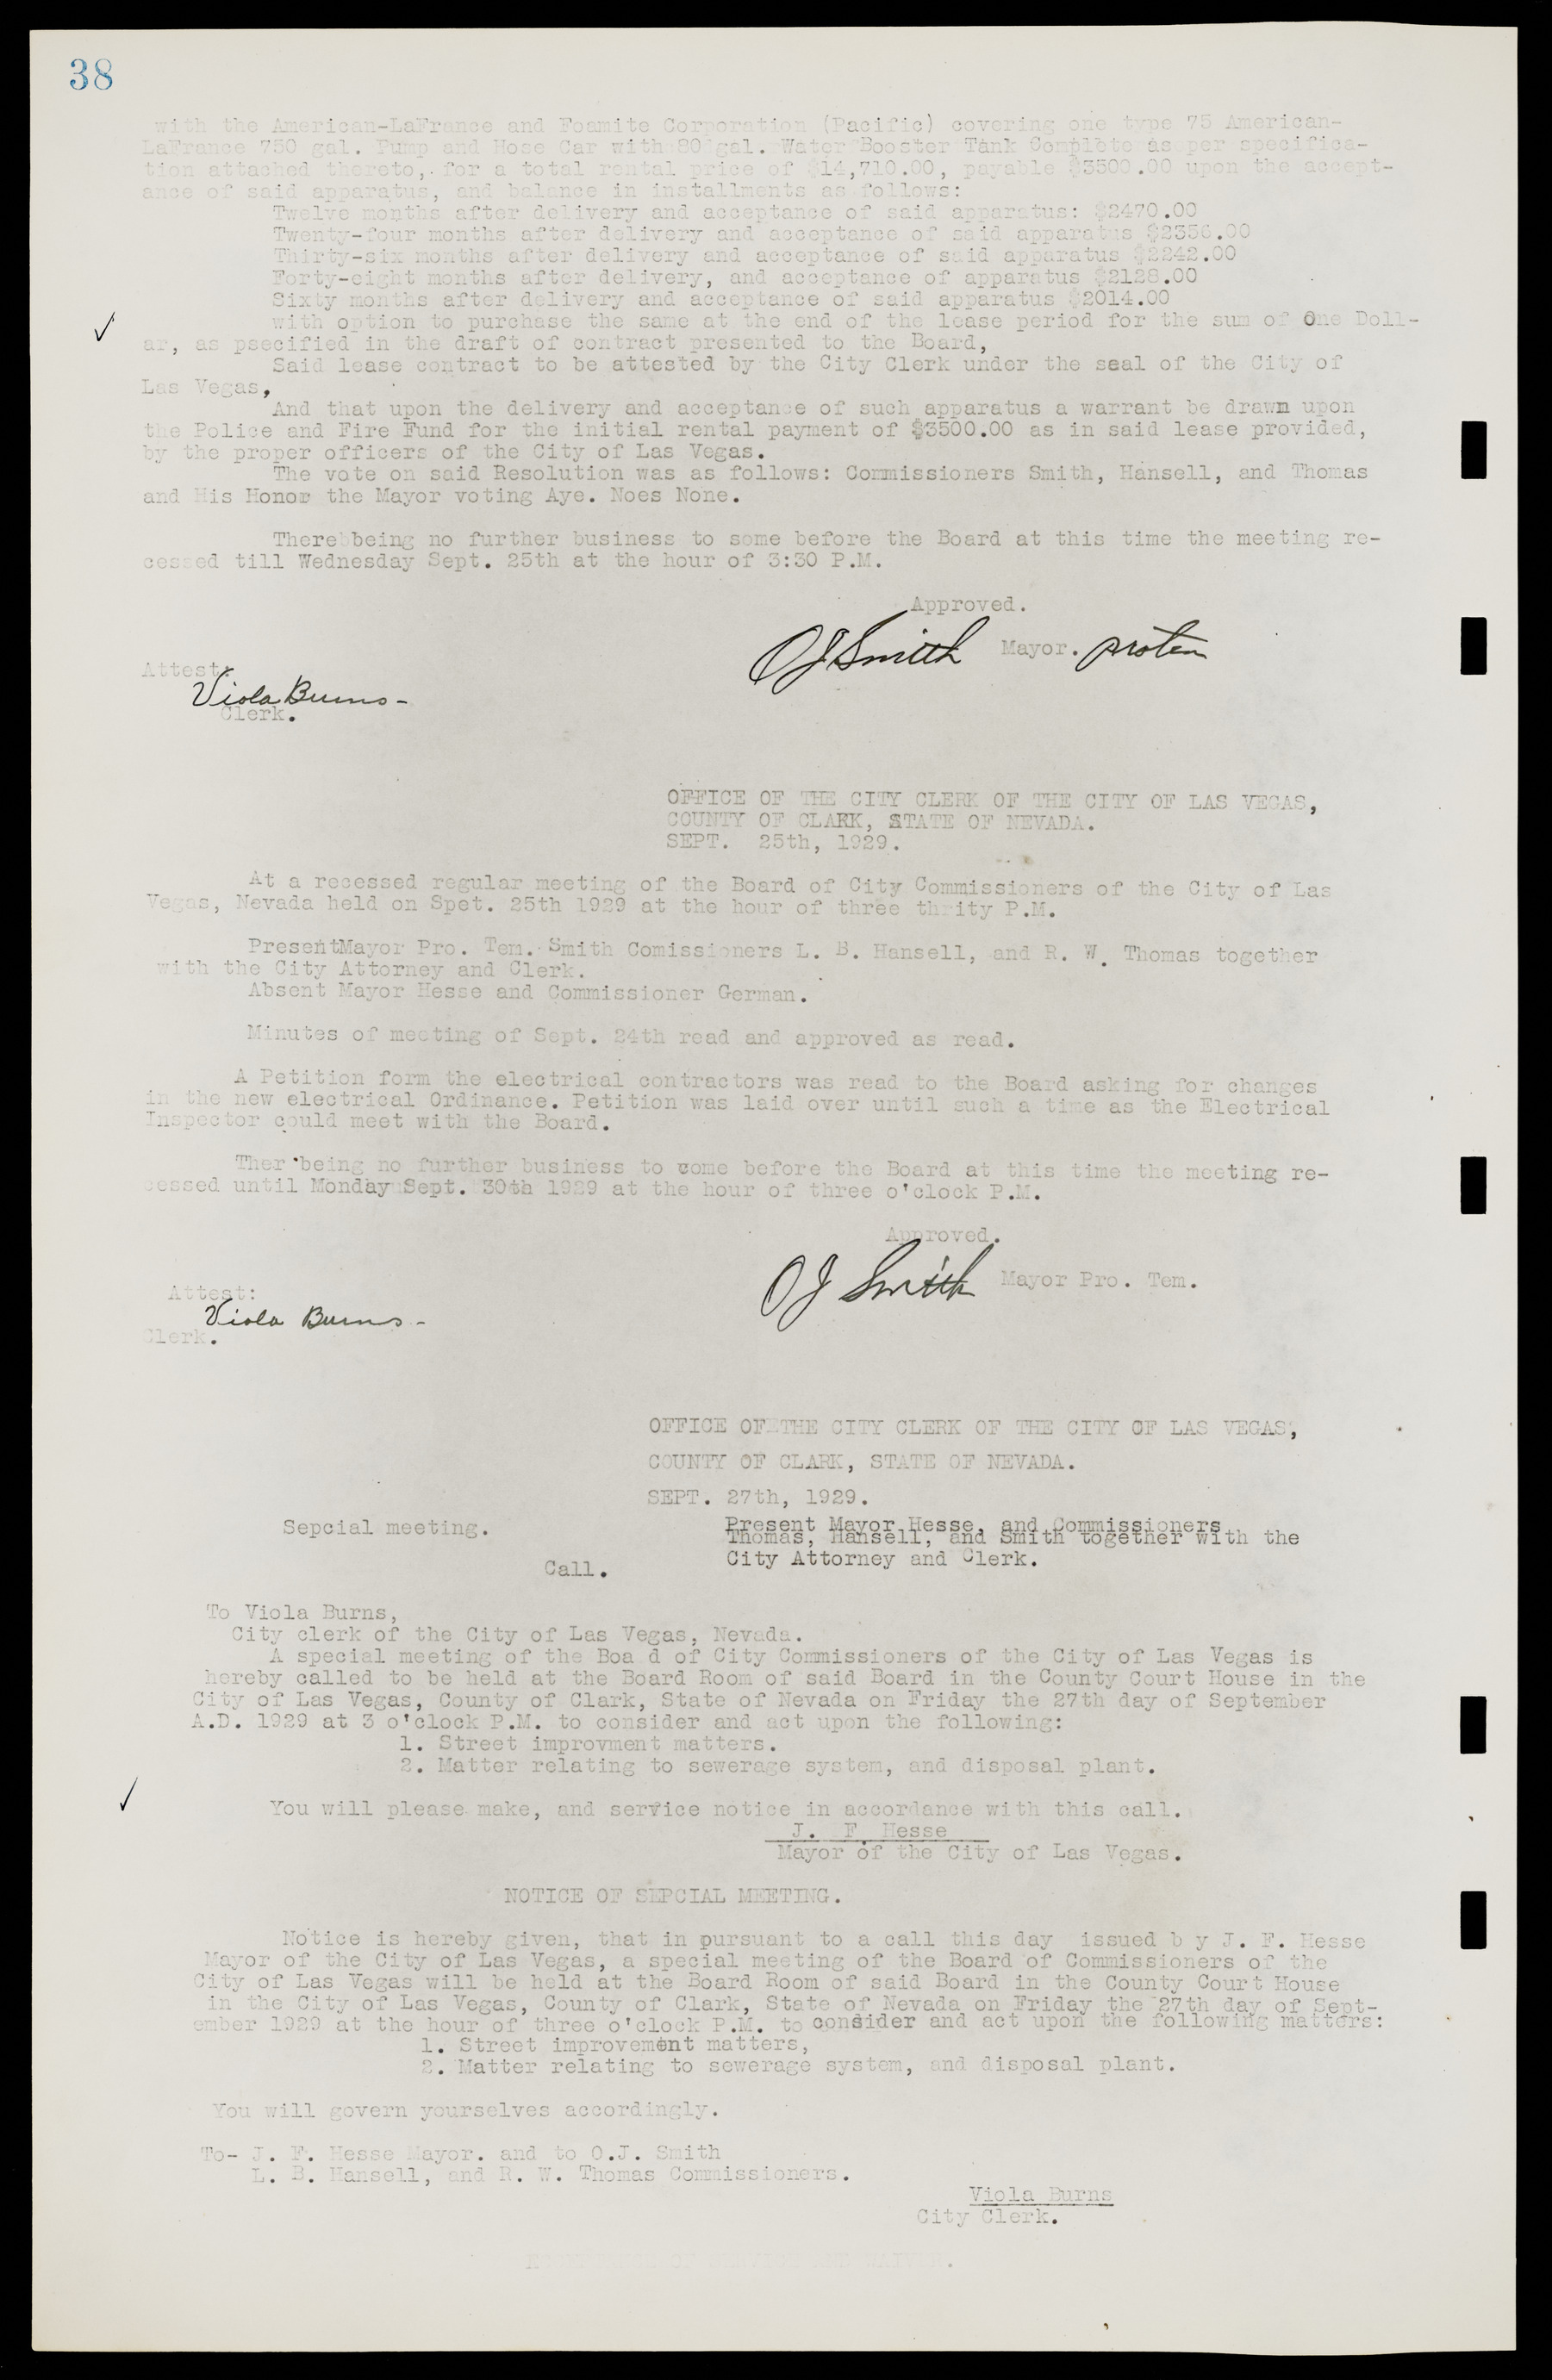 Las Vegas City Commission Minutes, May 14, 1929 to February 11, 1937, lvc000003-44